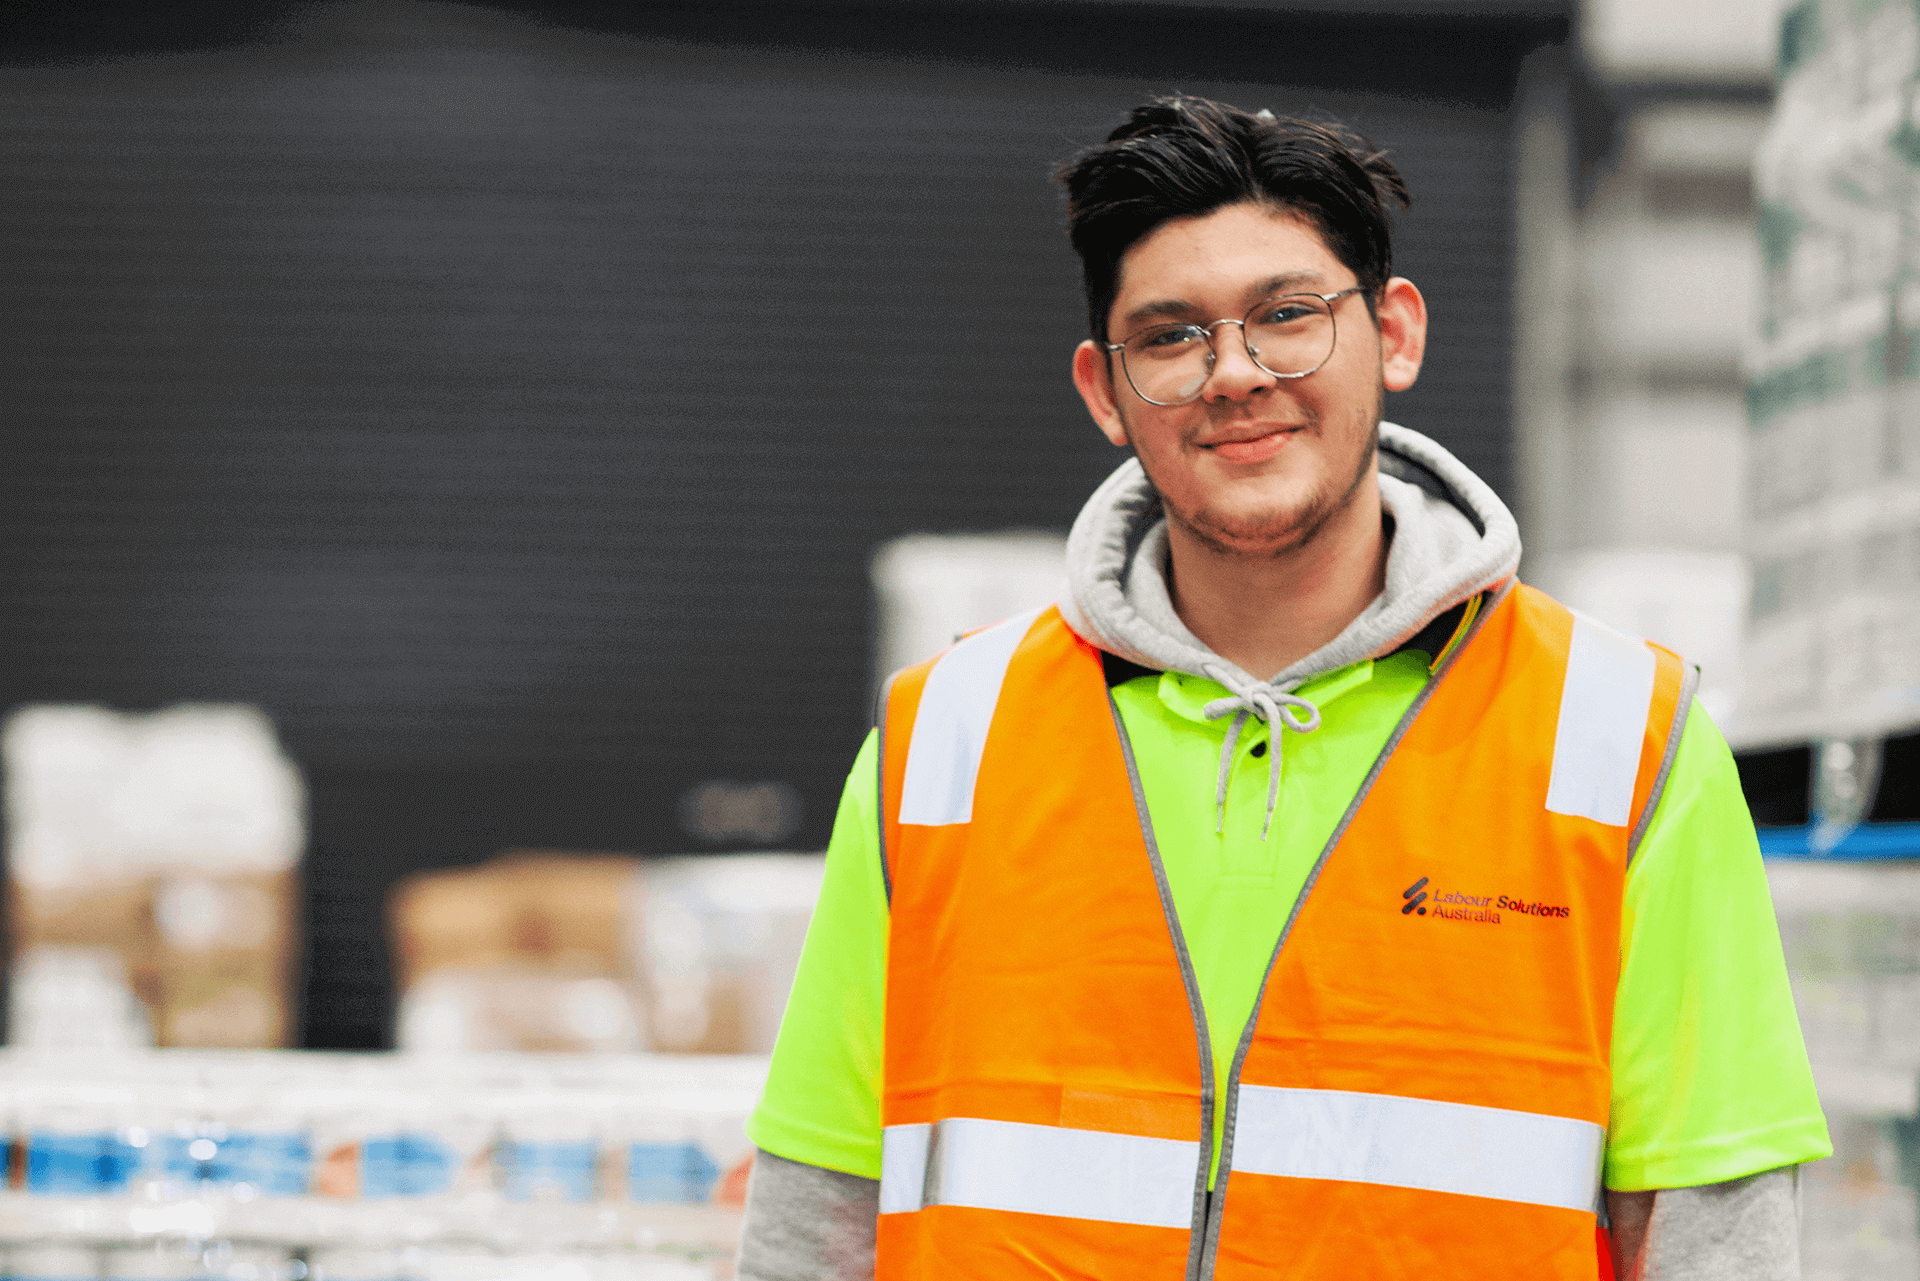 Happy Warehouse Worker Smiling at Camera